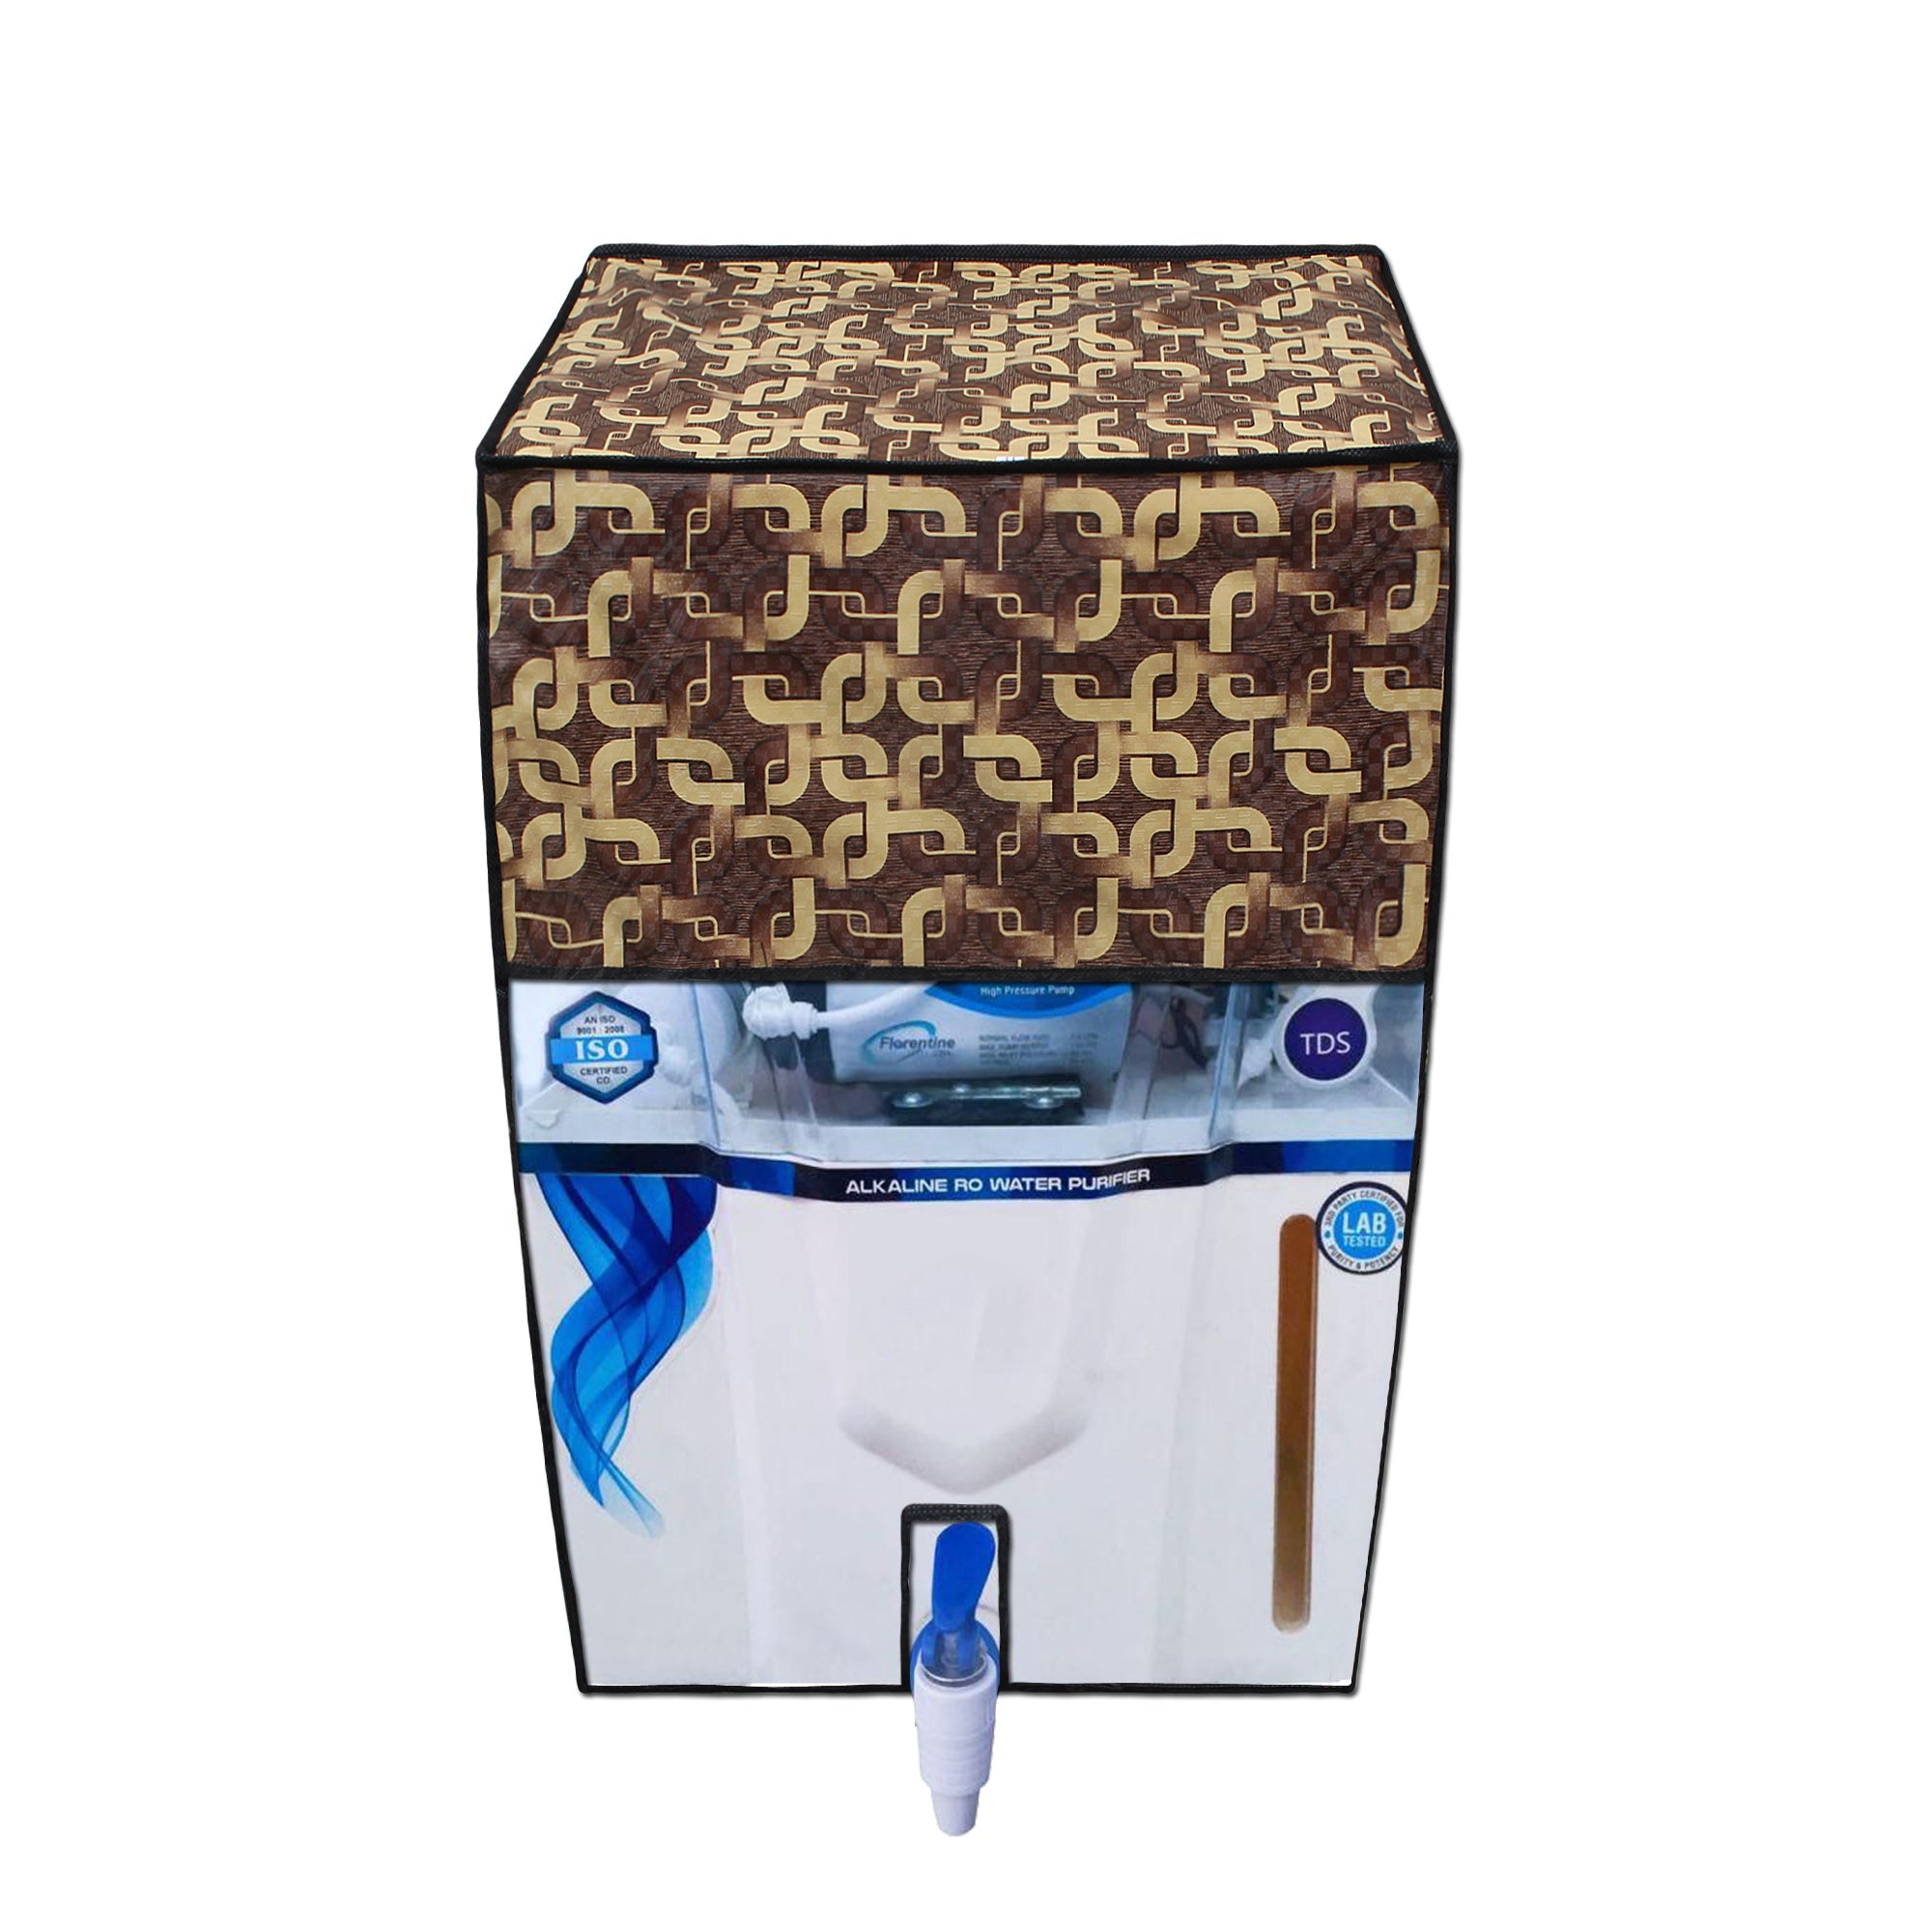 Waterproof & Dustproof Water Purifier RO Cover, SA39 - Dream Care Furnishings Private Limited